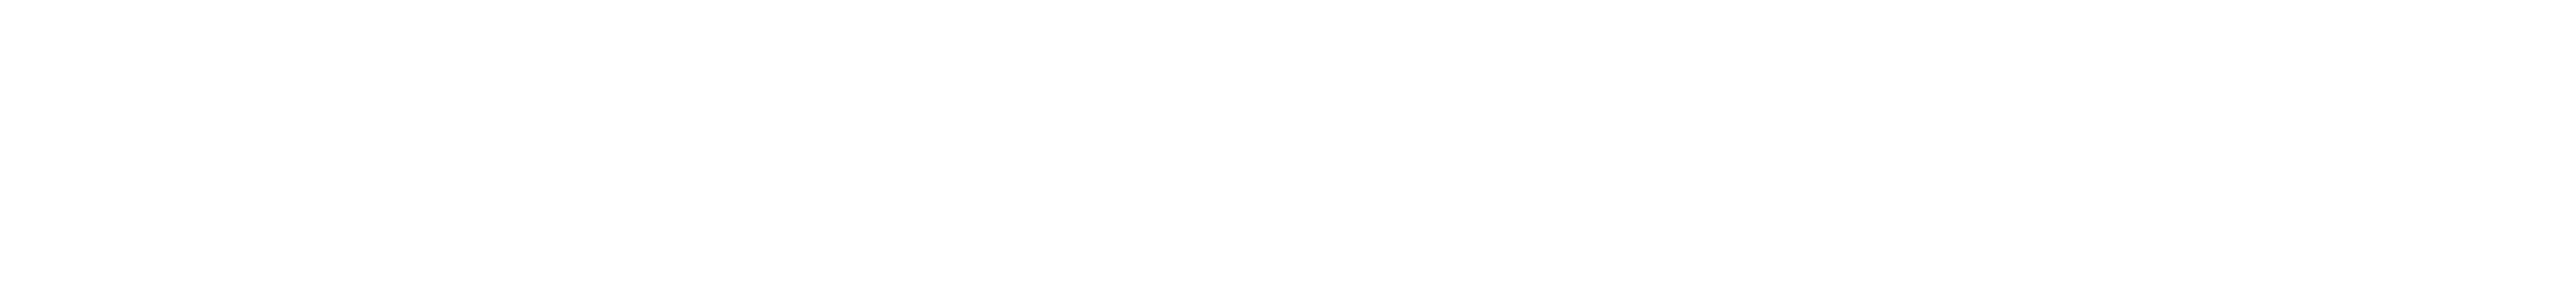 The House of the Spirits logo